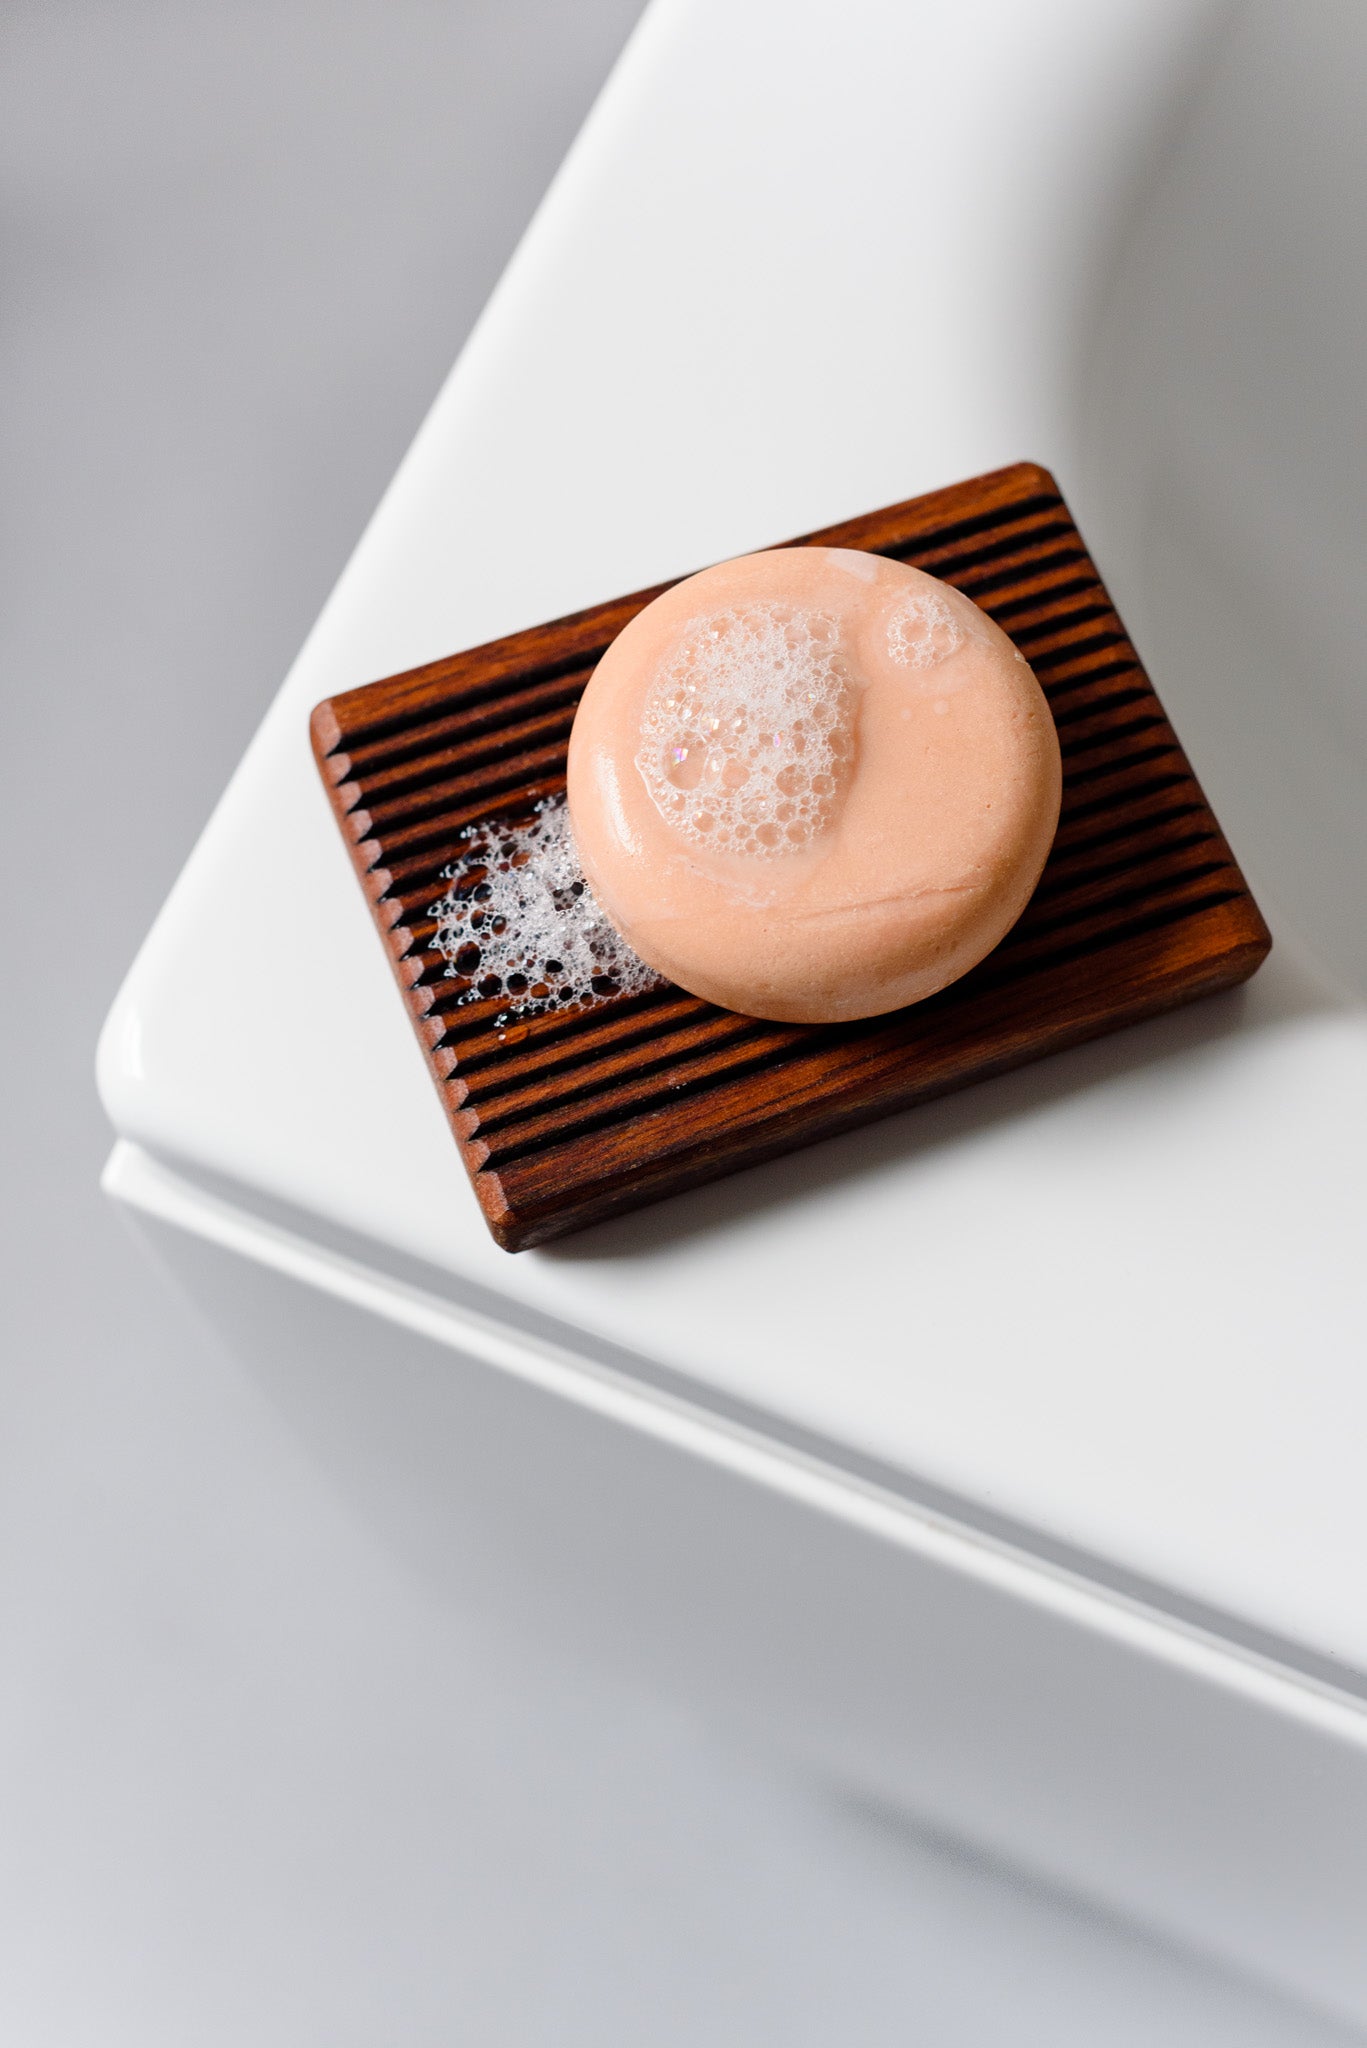 Kind2 Solid Shampoo Bar - The Hydrating One. Plastic free haircare.